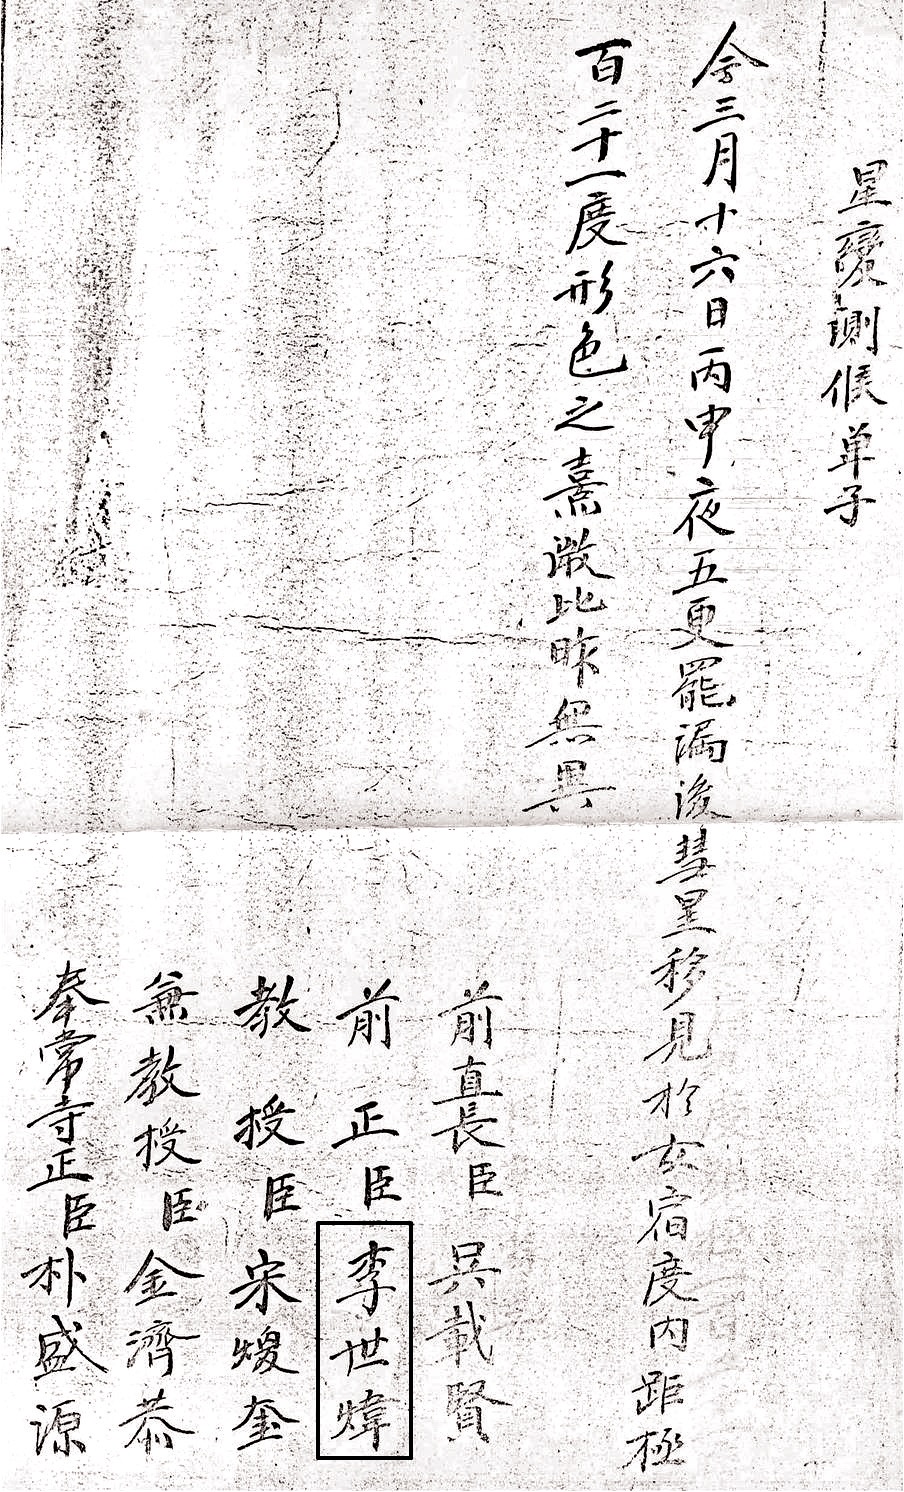 A comet record on the sixteenth day of the third month of the 1759 SeongbyeonDeungrok. Yi Se-wui (李世？), a son of Yi Koo (李絿), had succeeded the comet observation 36 years after his father (Courtesy of Yonsei University Library).